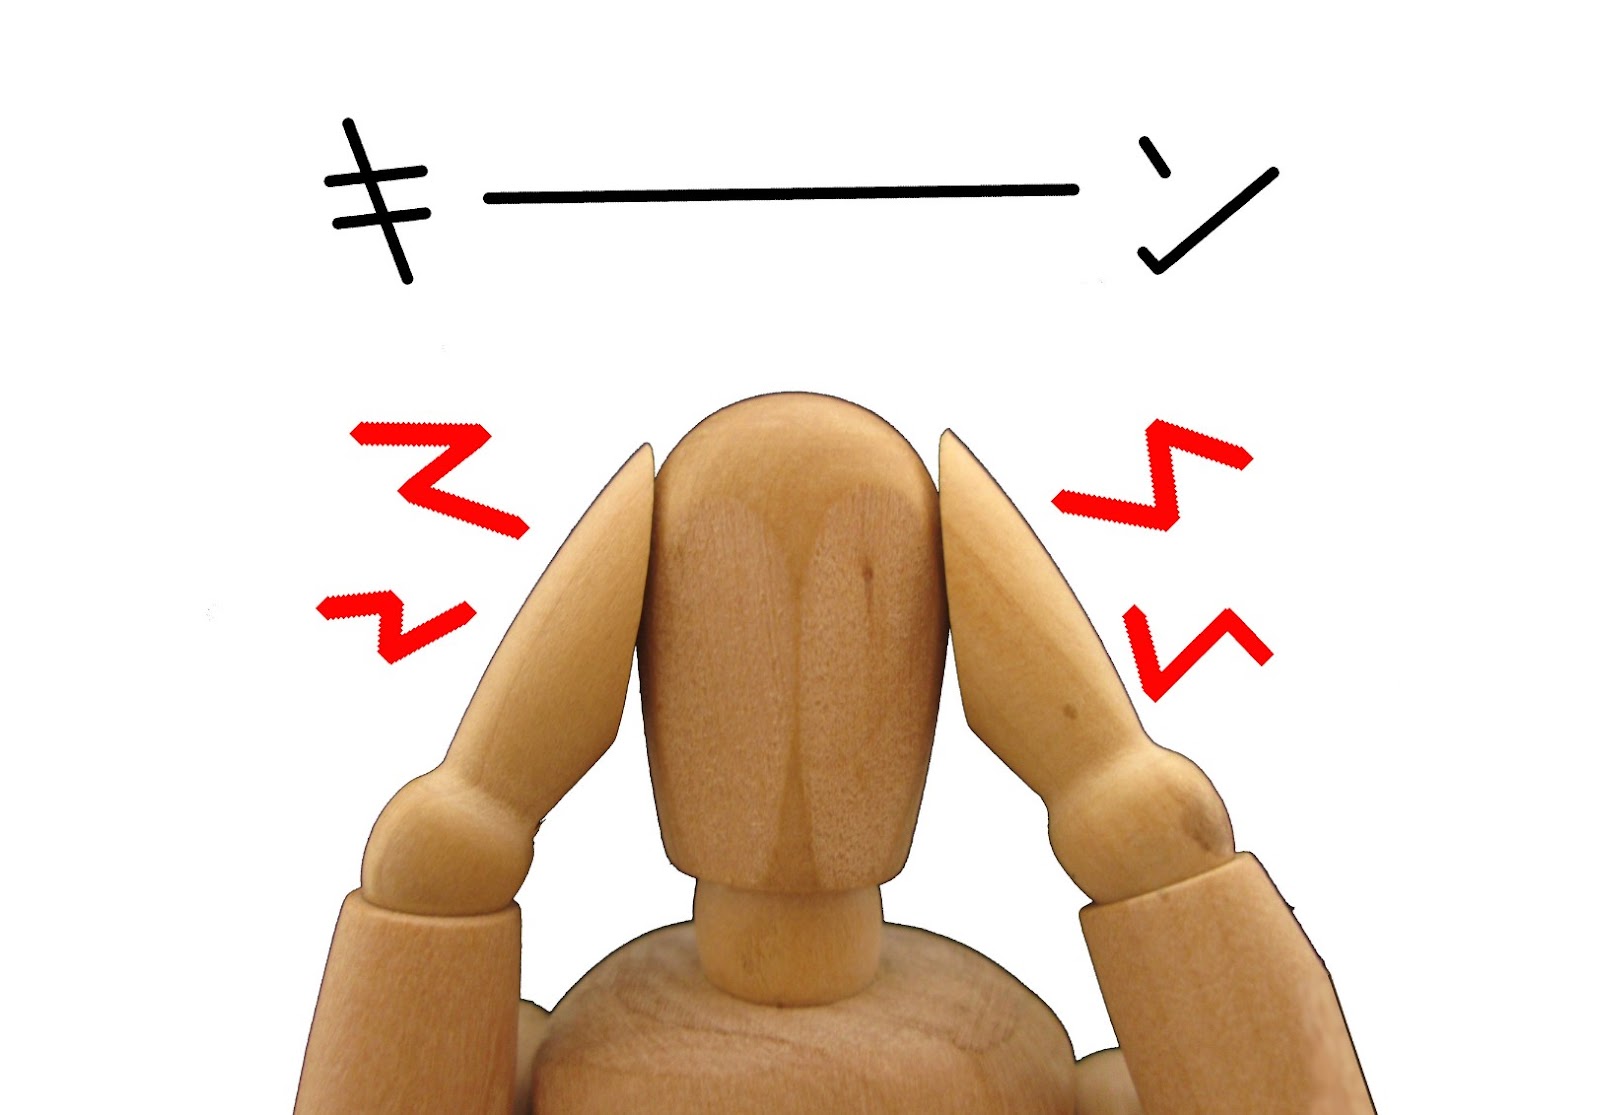 A wooden figurine has its arms and hands positioned at the sides of its head.